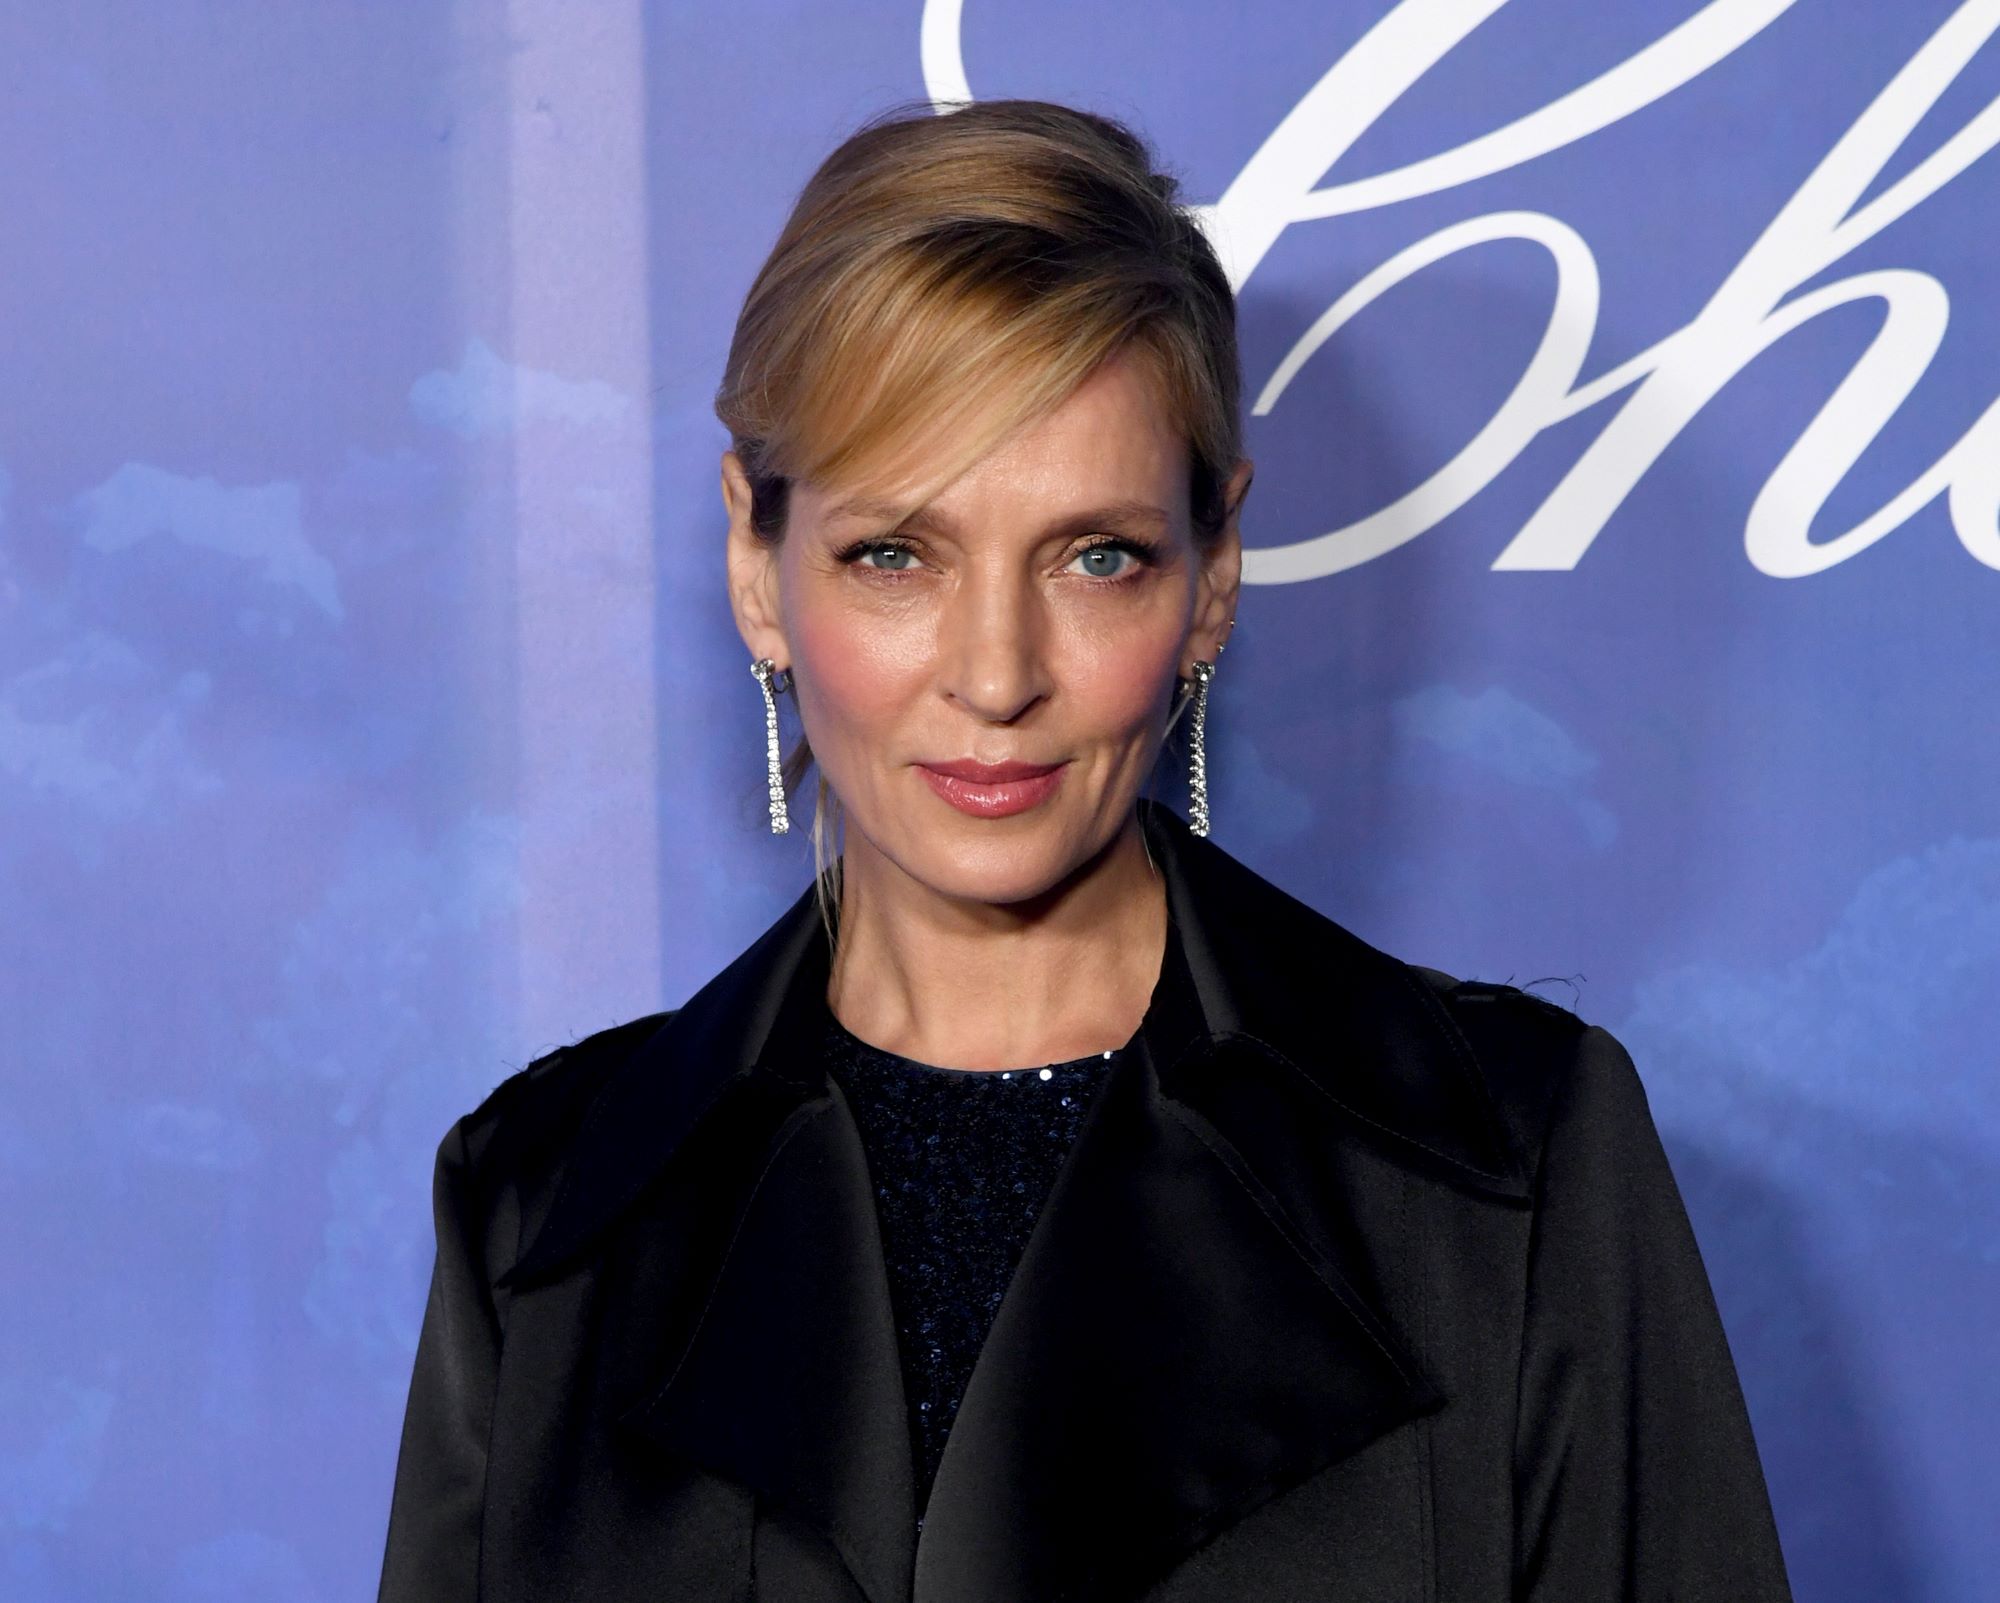 Uma Thurman wearing a black shirt with a black blazer in front of a blue background with cursive white writing.